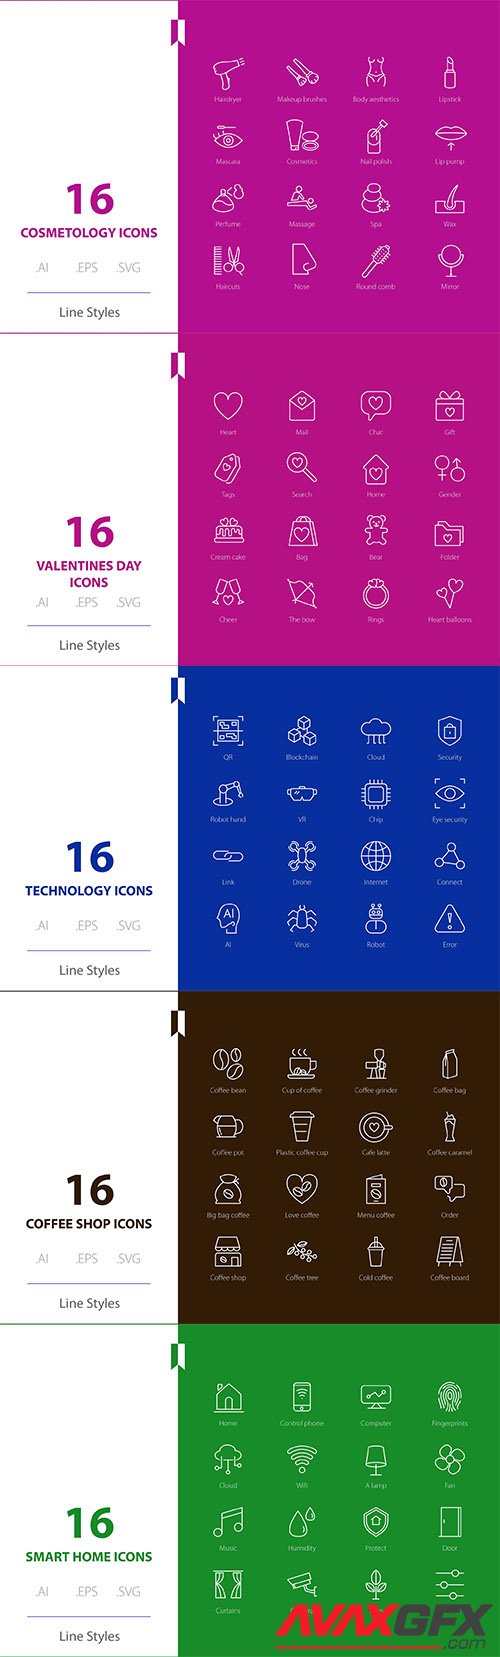 Mix collection of vector icons